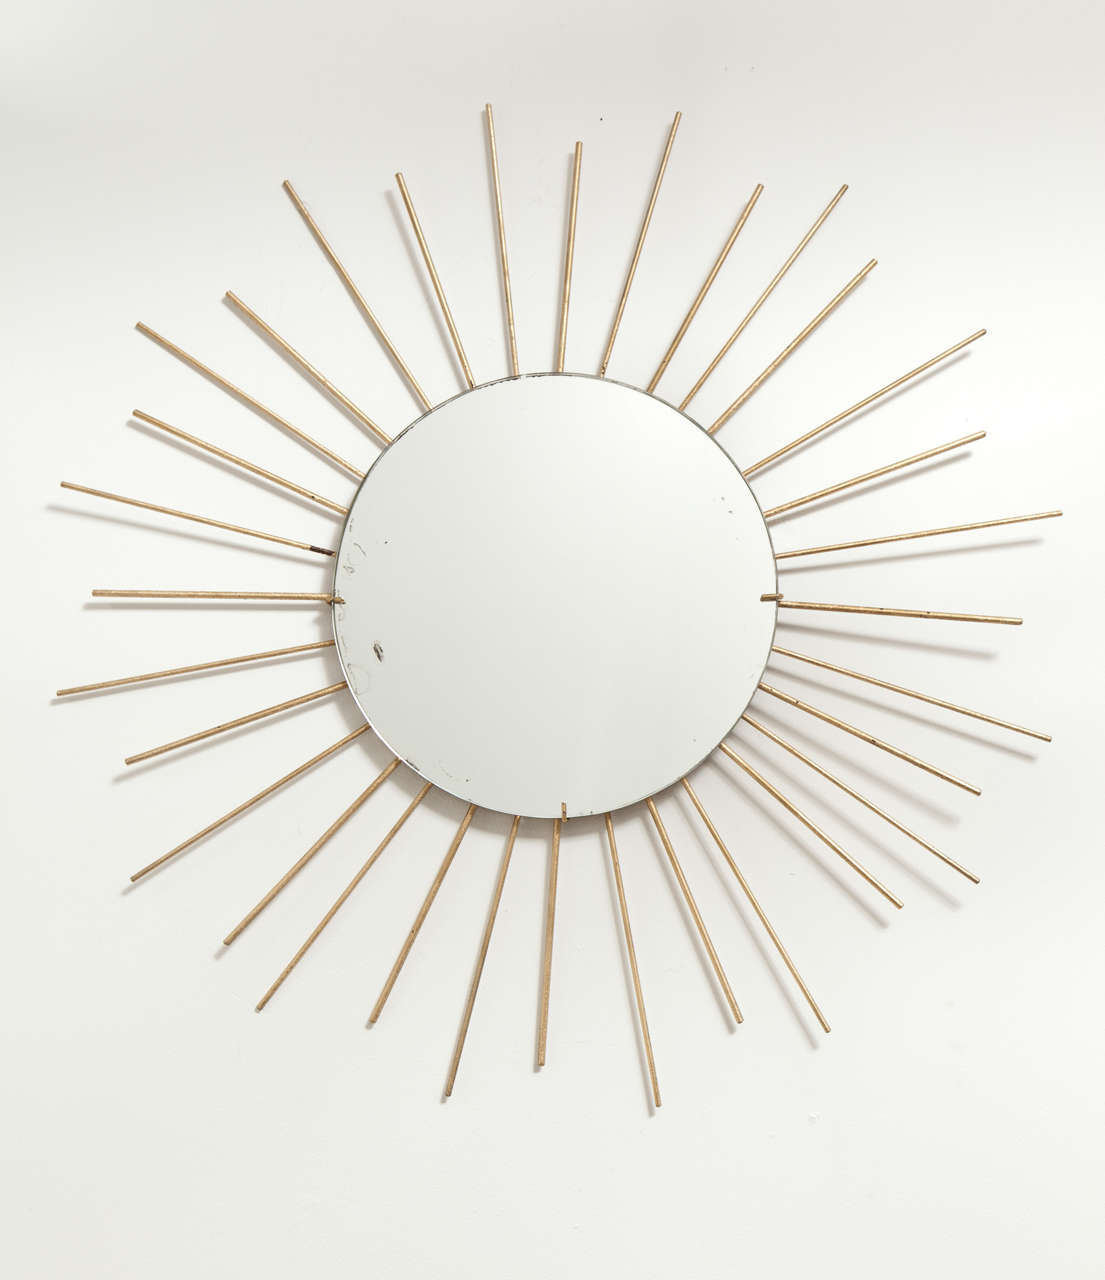 Large brass starburst wall mirror, France, circa 1960. Features a round mirror with invisible frame and brass rods in alternating lengths.  

Dimensions:
28 inches in diameter.
12 inch mirror diameter.